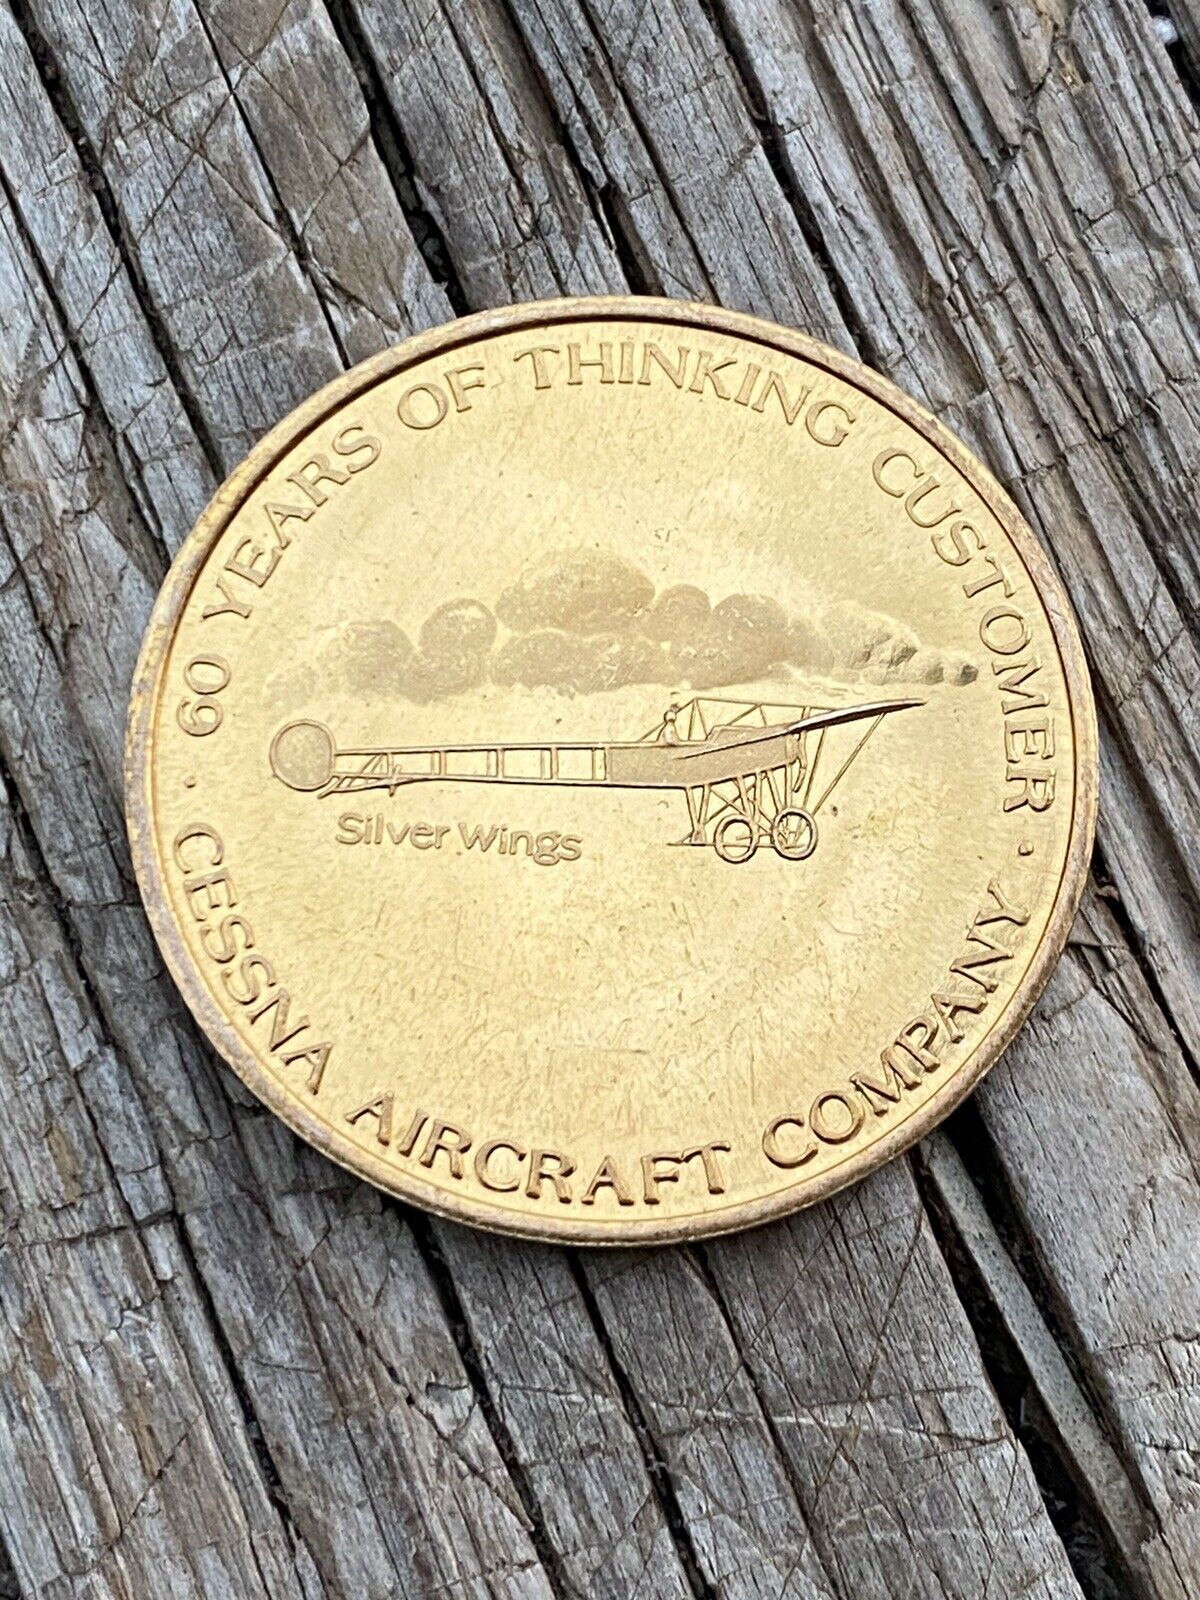 CESSNA EXPO 72 SILVER WINGS COMMEMORATIVE Airplane Coin Token 1972 60 YEARS